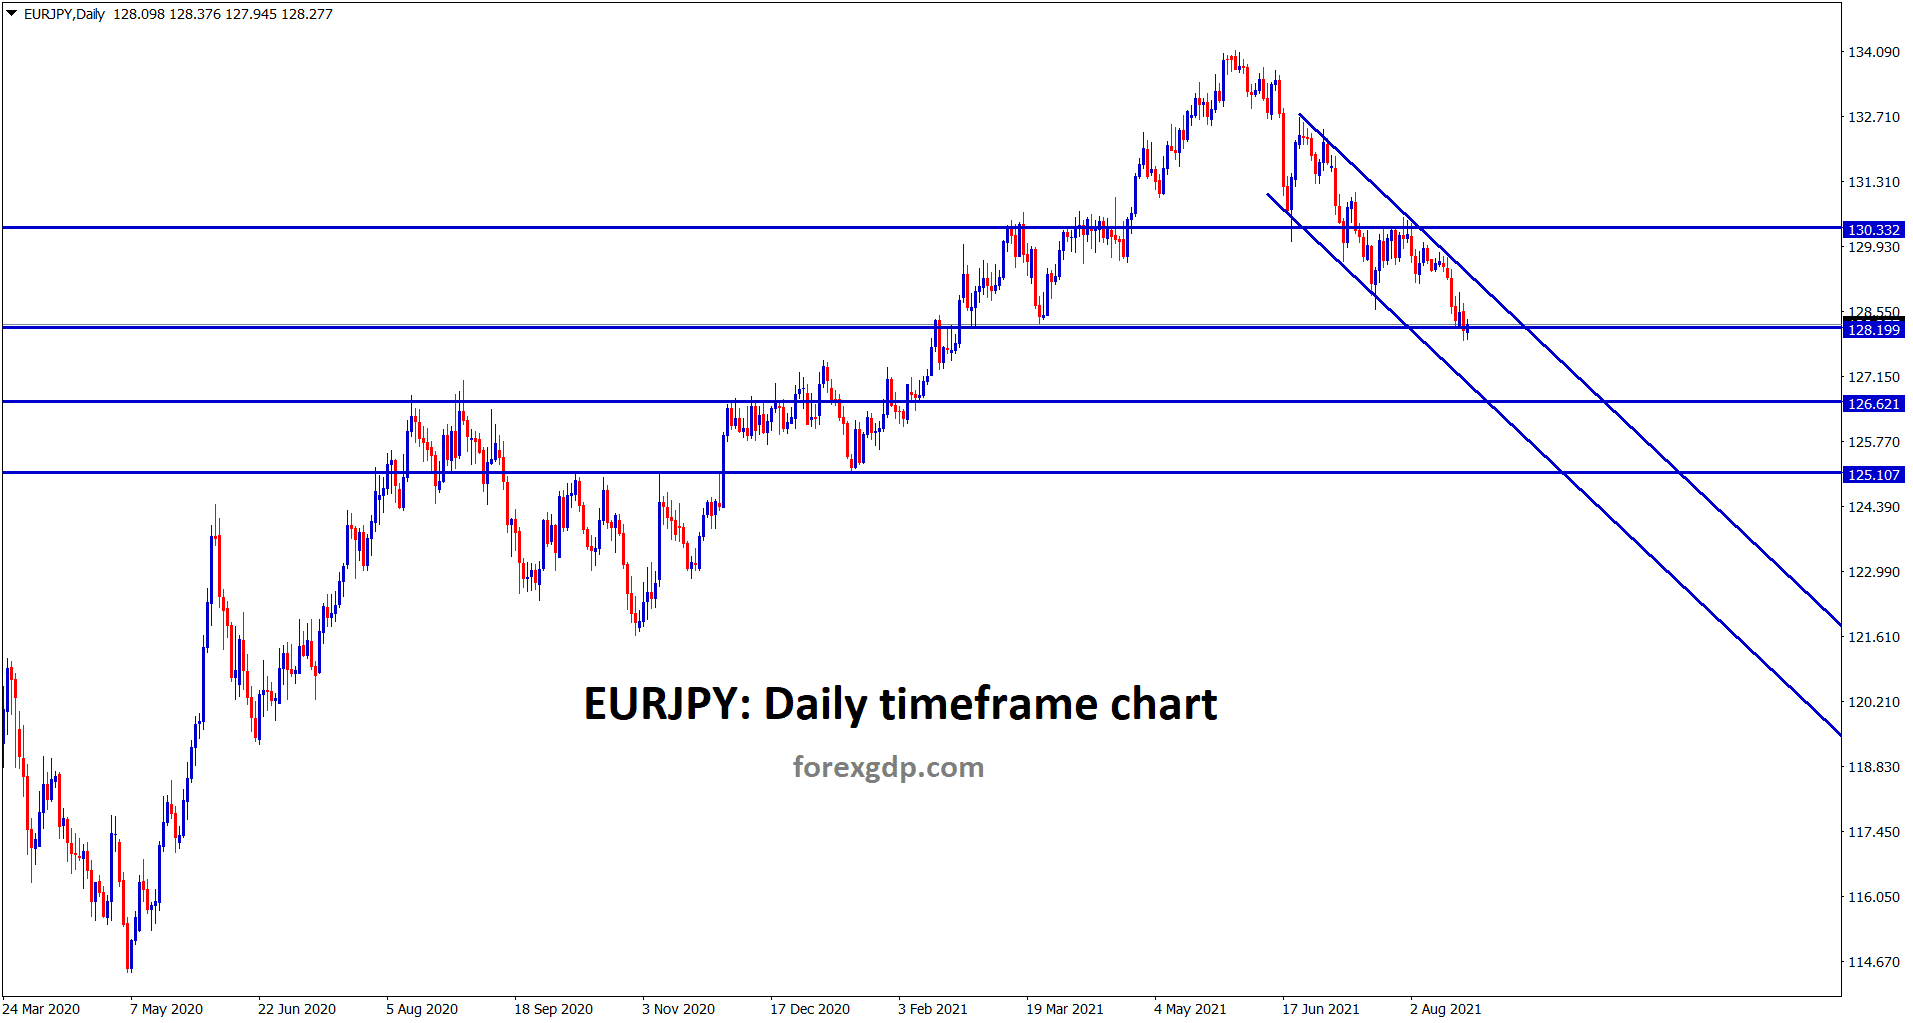 EURJPY is standing at the support and also moving in a descending channel